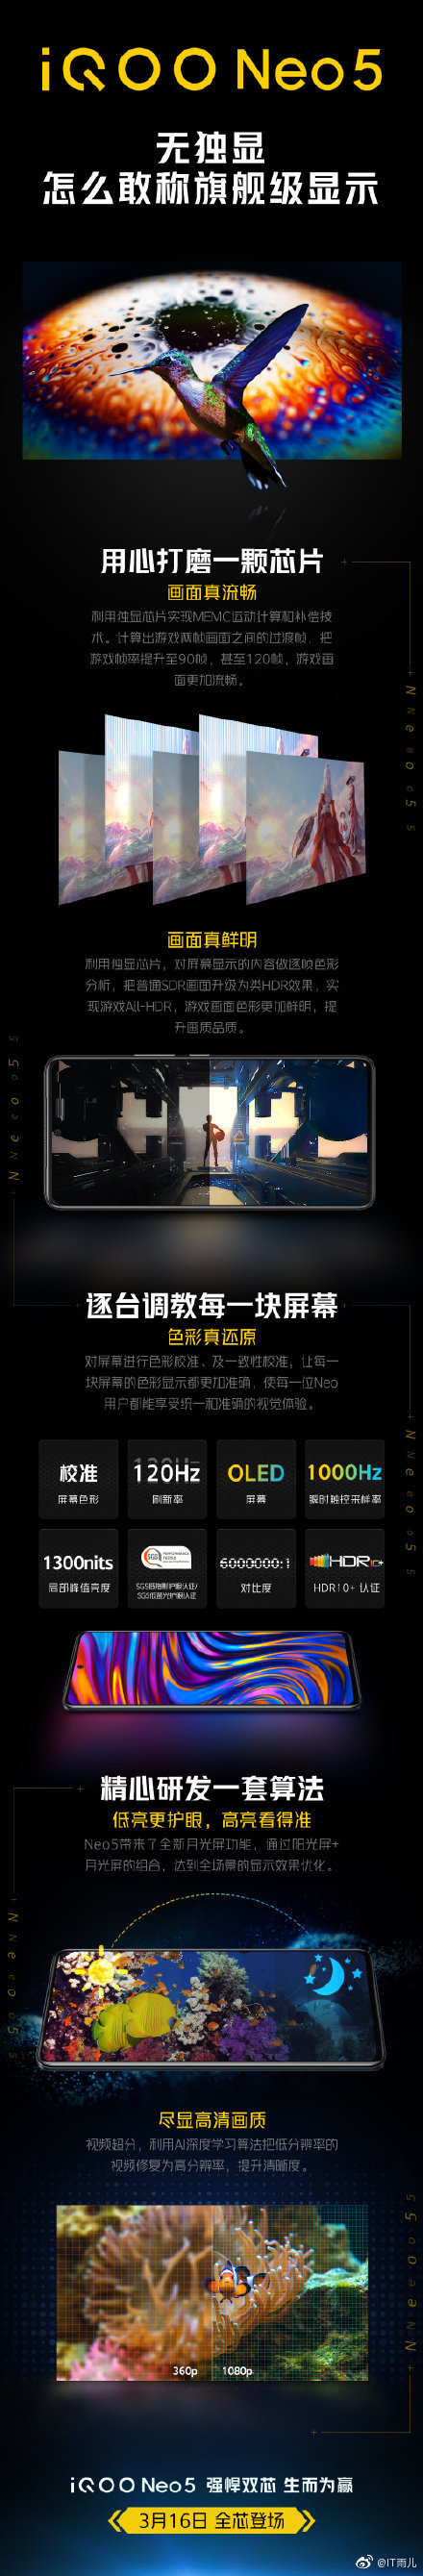 iQOO releases a hype-laden poster for the Neo5's launch. (Source: Weibo)